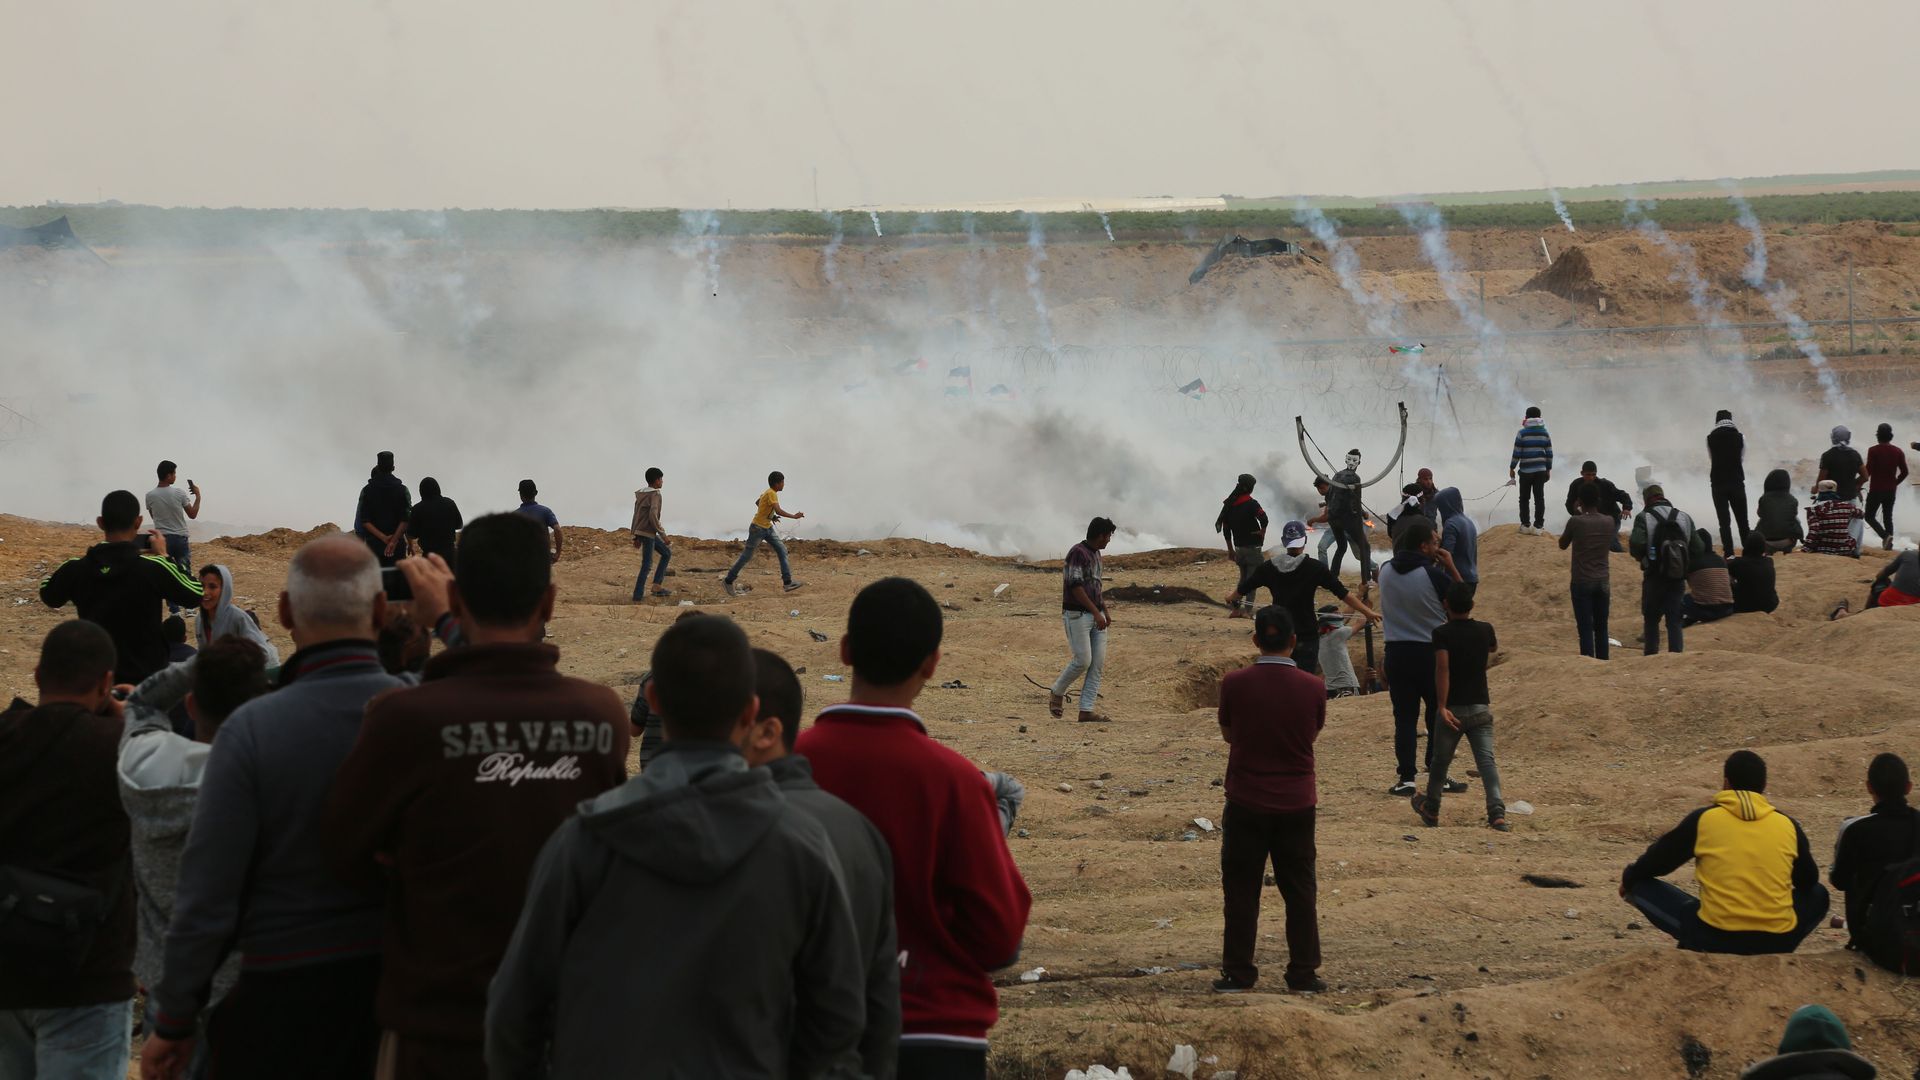 Tear gas canisters are fired by Israeli troops at Palestinian demonstrators on Friday.